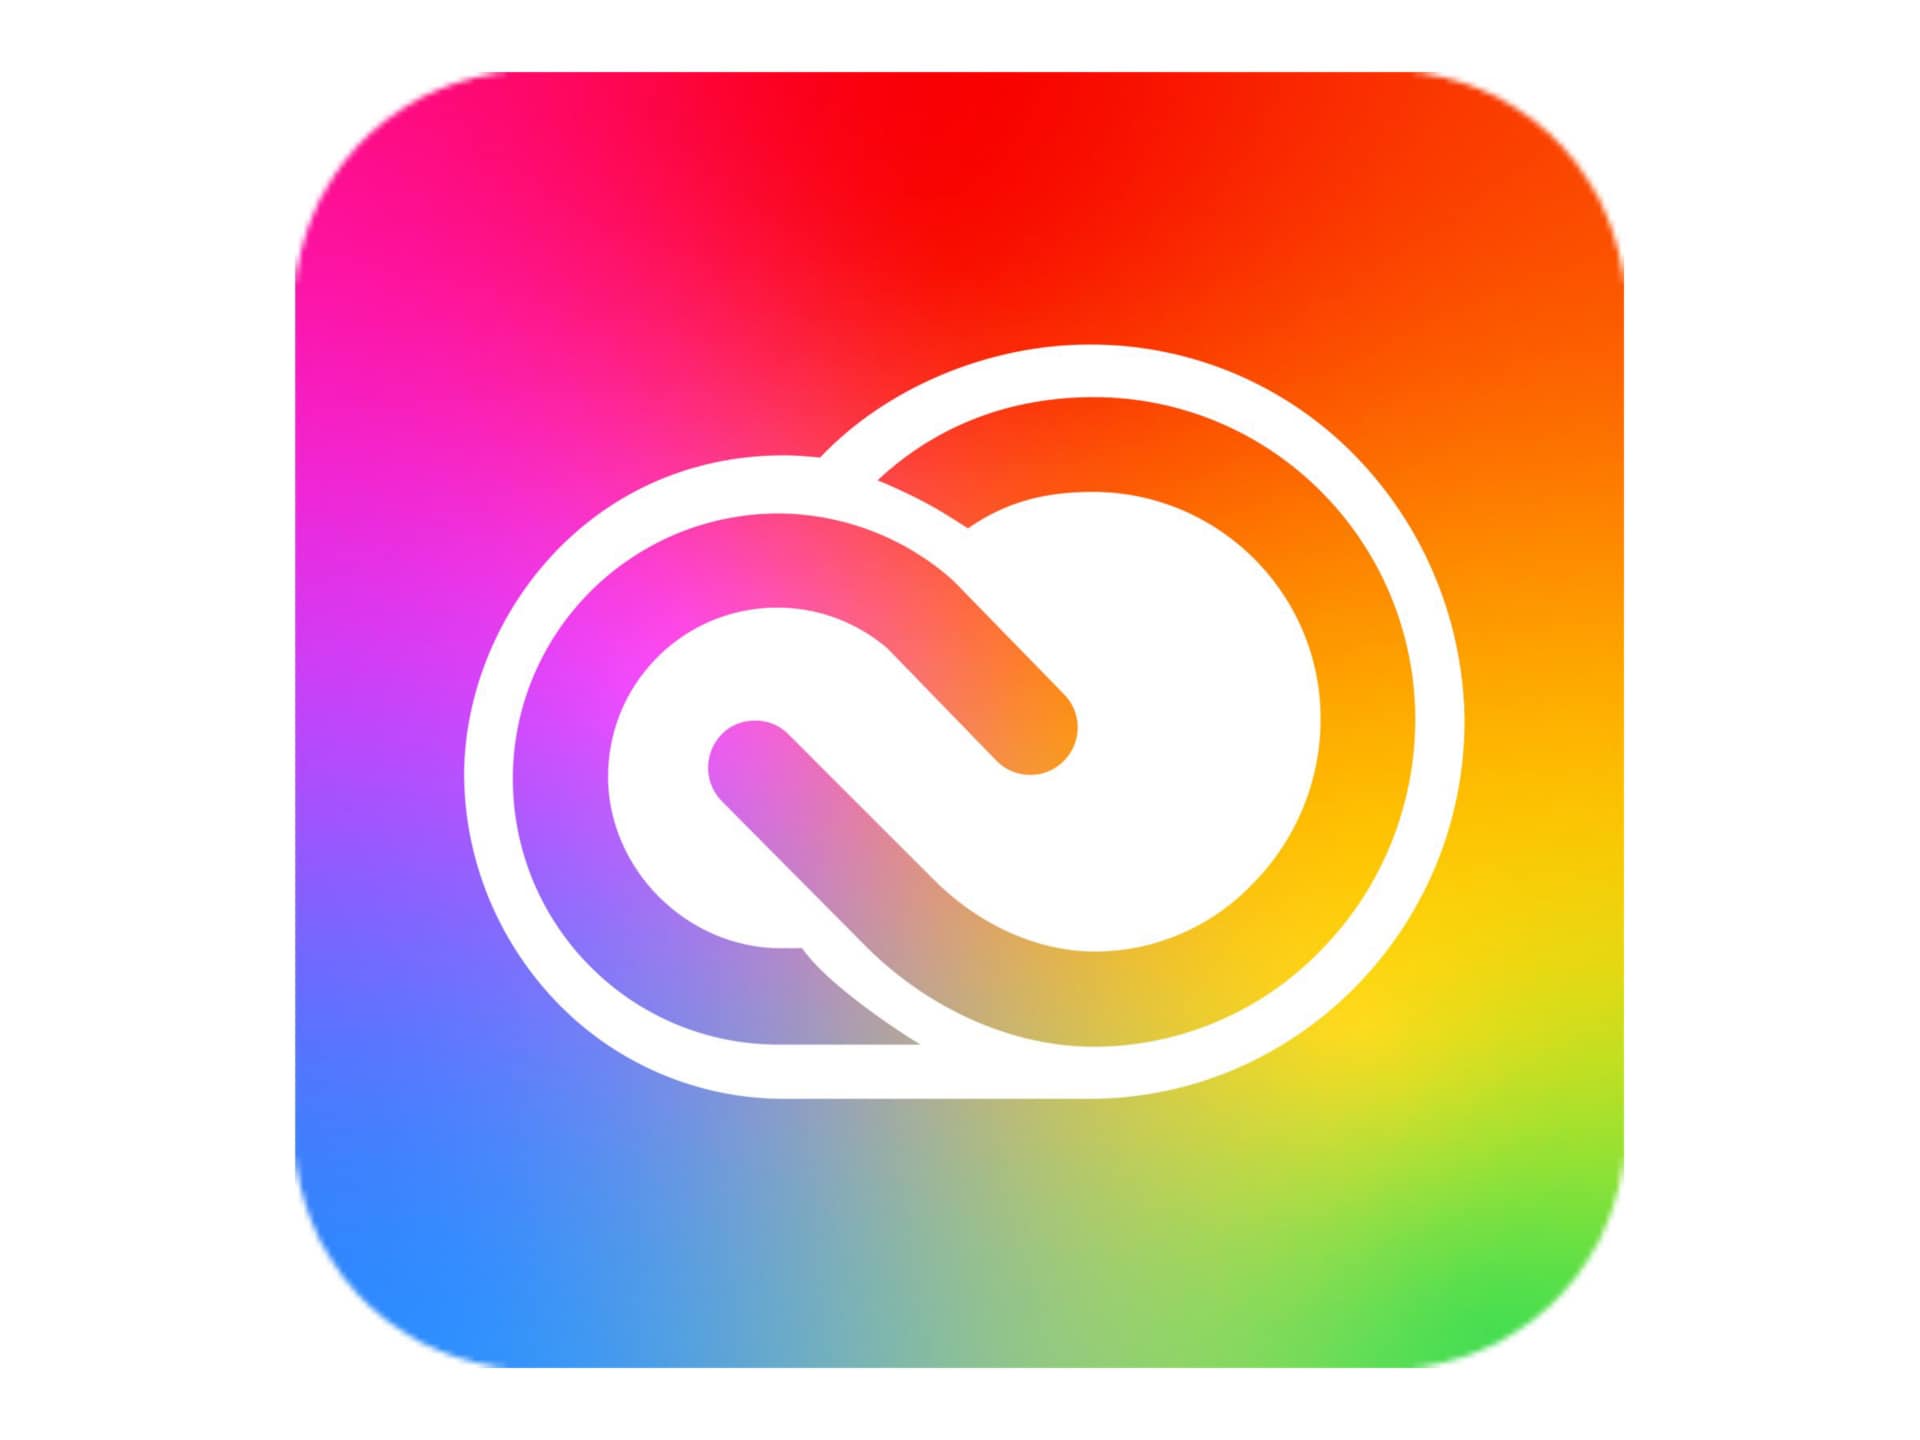 Adobe Creative Cloud for Enterprise - All Apps - Subscription New (5 months) - 1 device